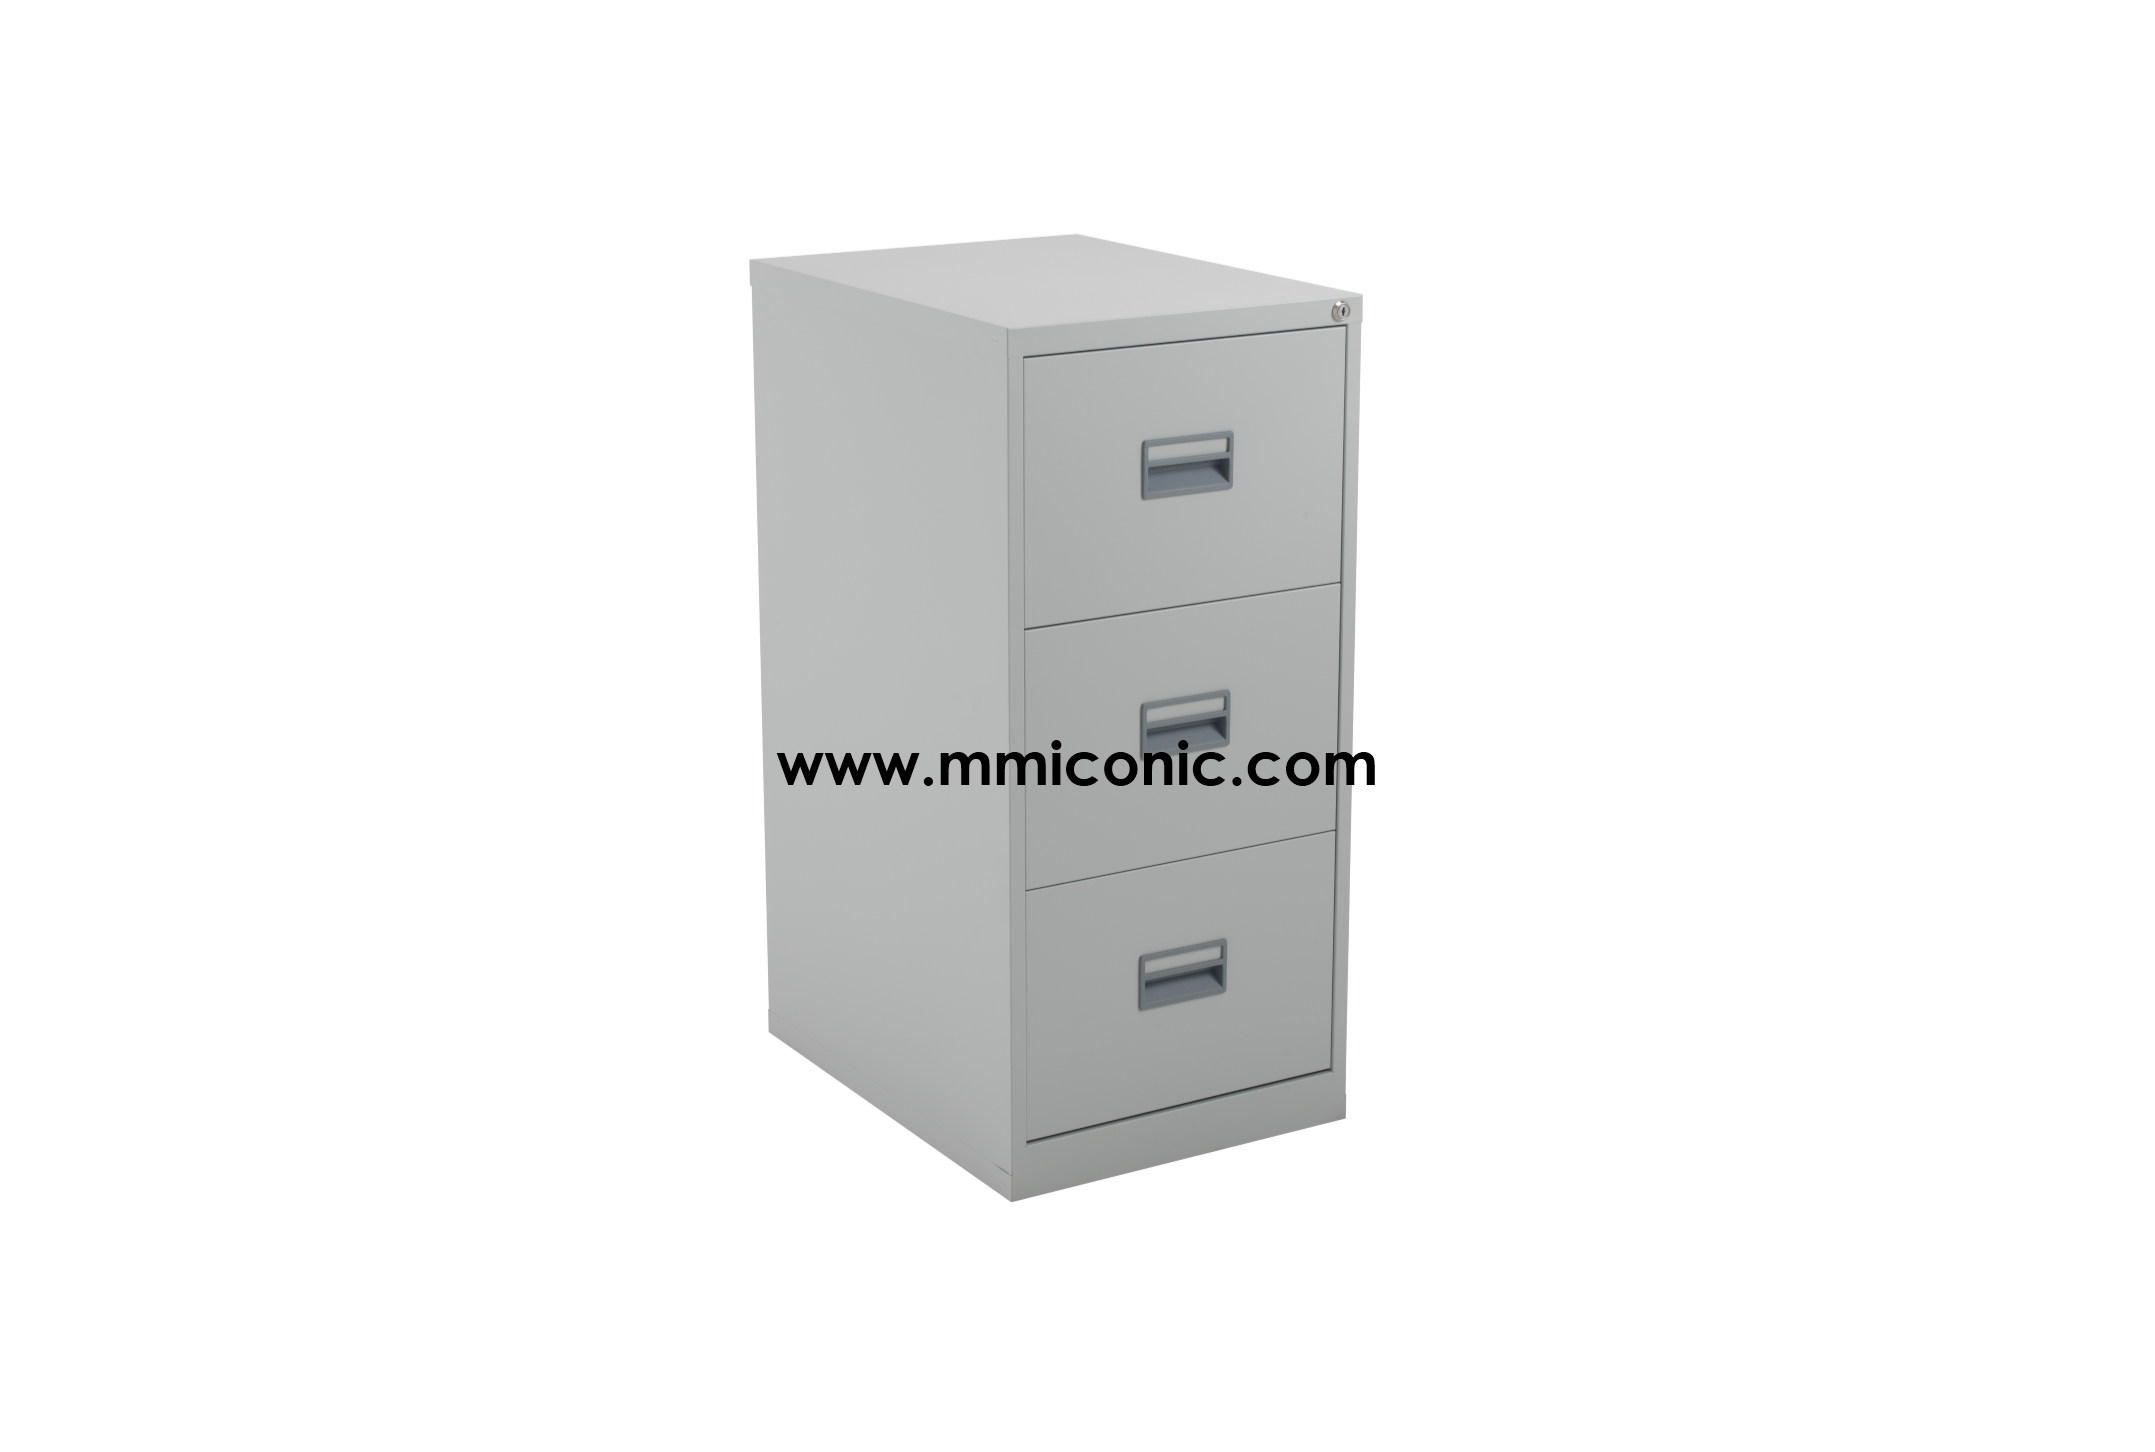 MS106C-3 – MM ICONIC Education Furniture Manufacturer Malaysia